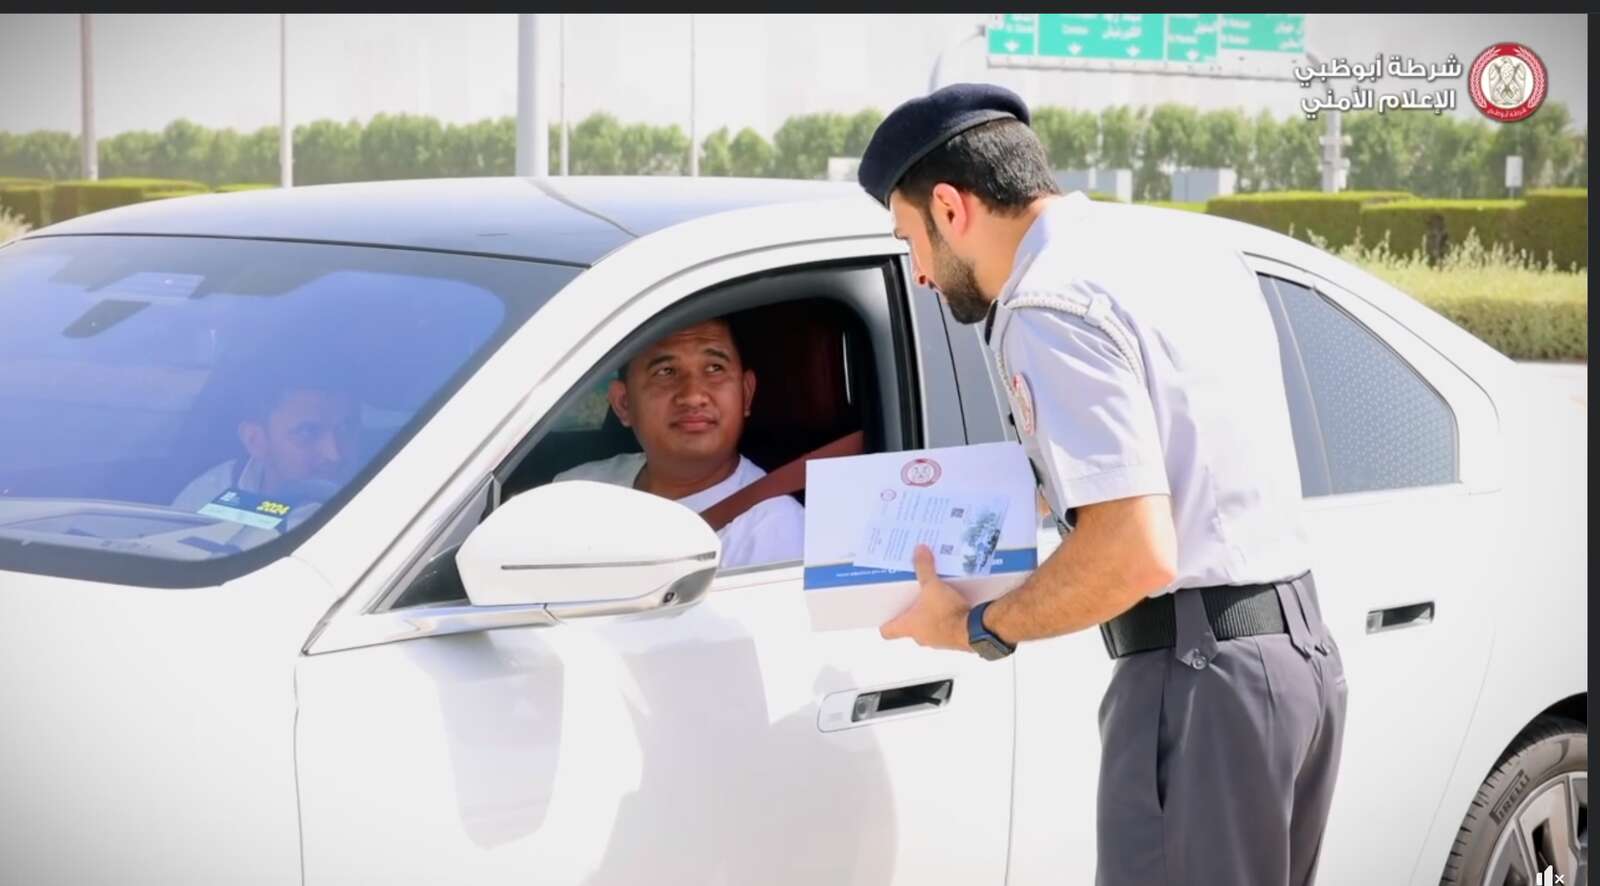 video: uae drivers get free fuel cards for following traffic rules in abu dhabi